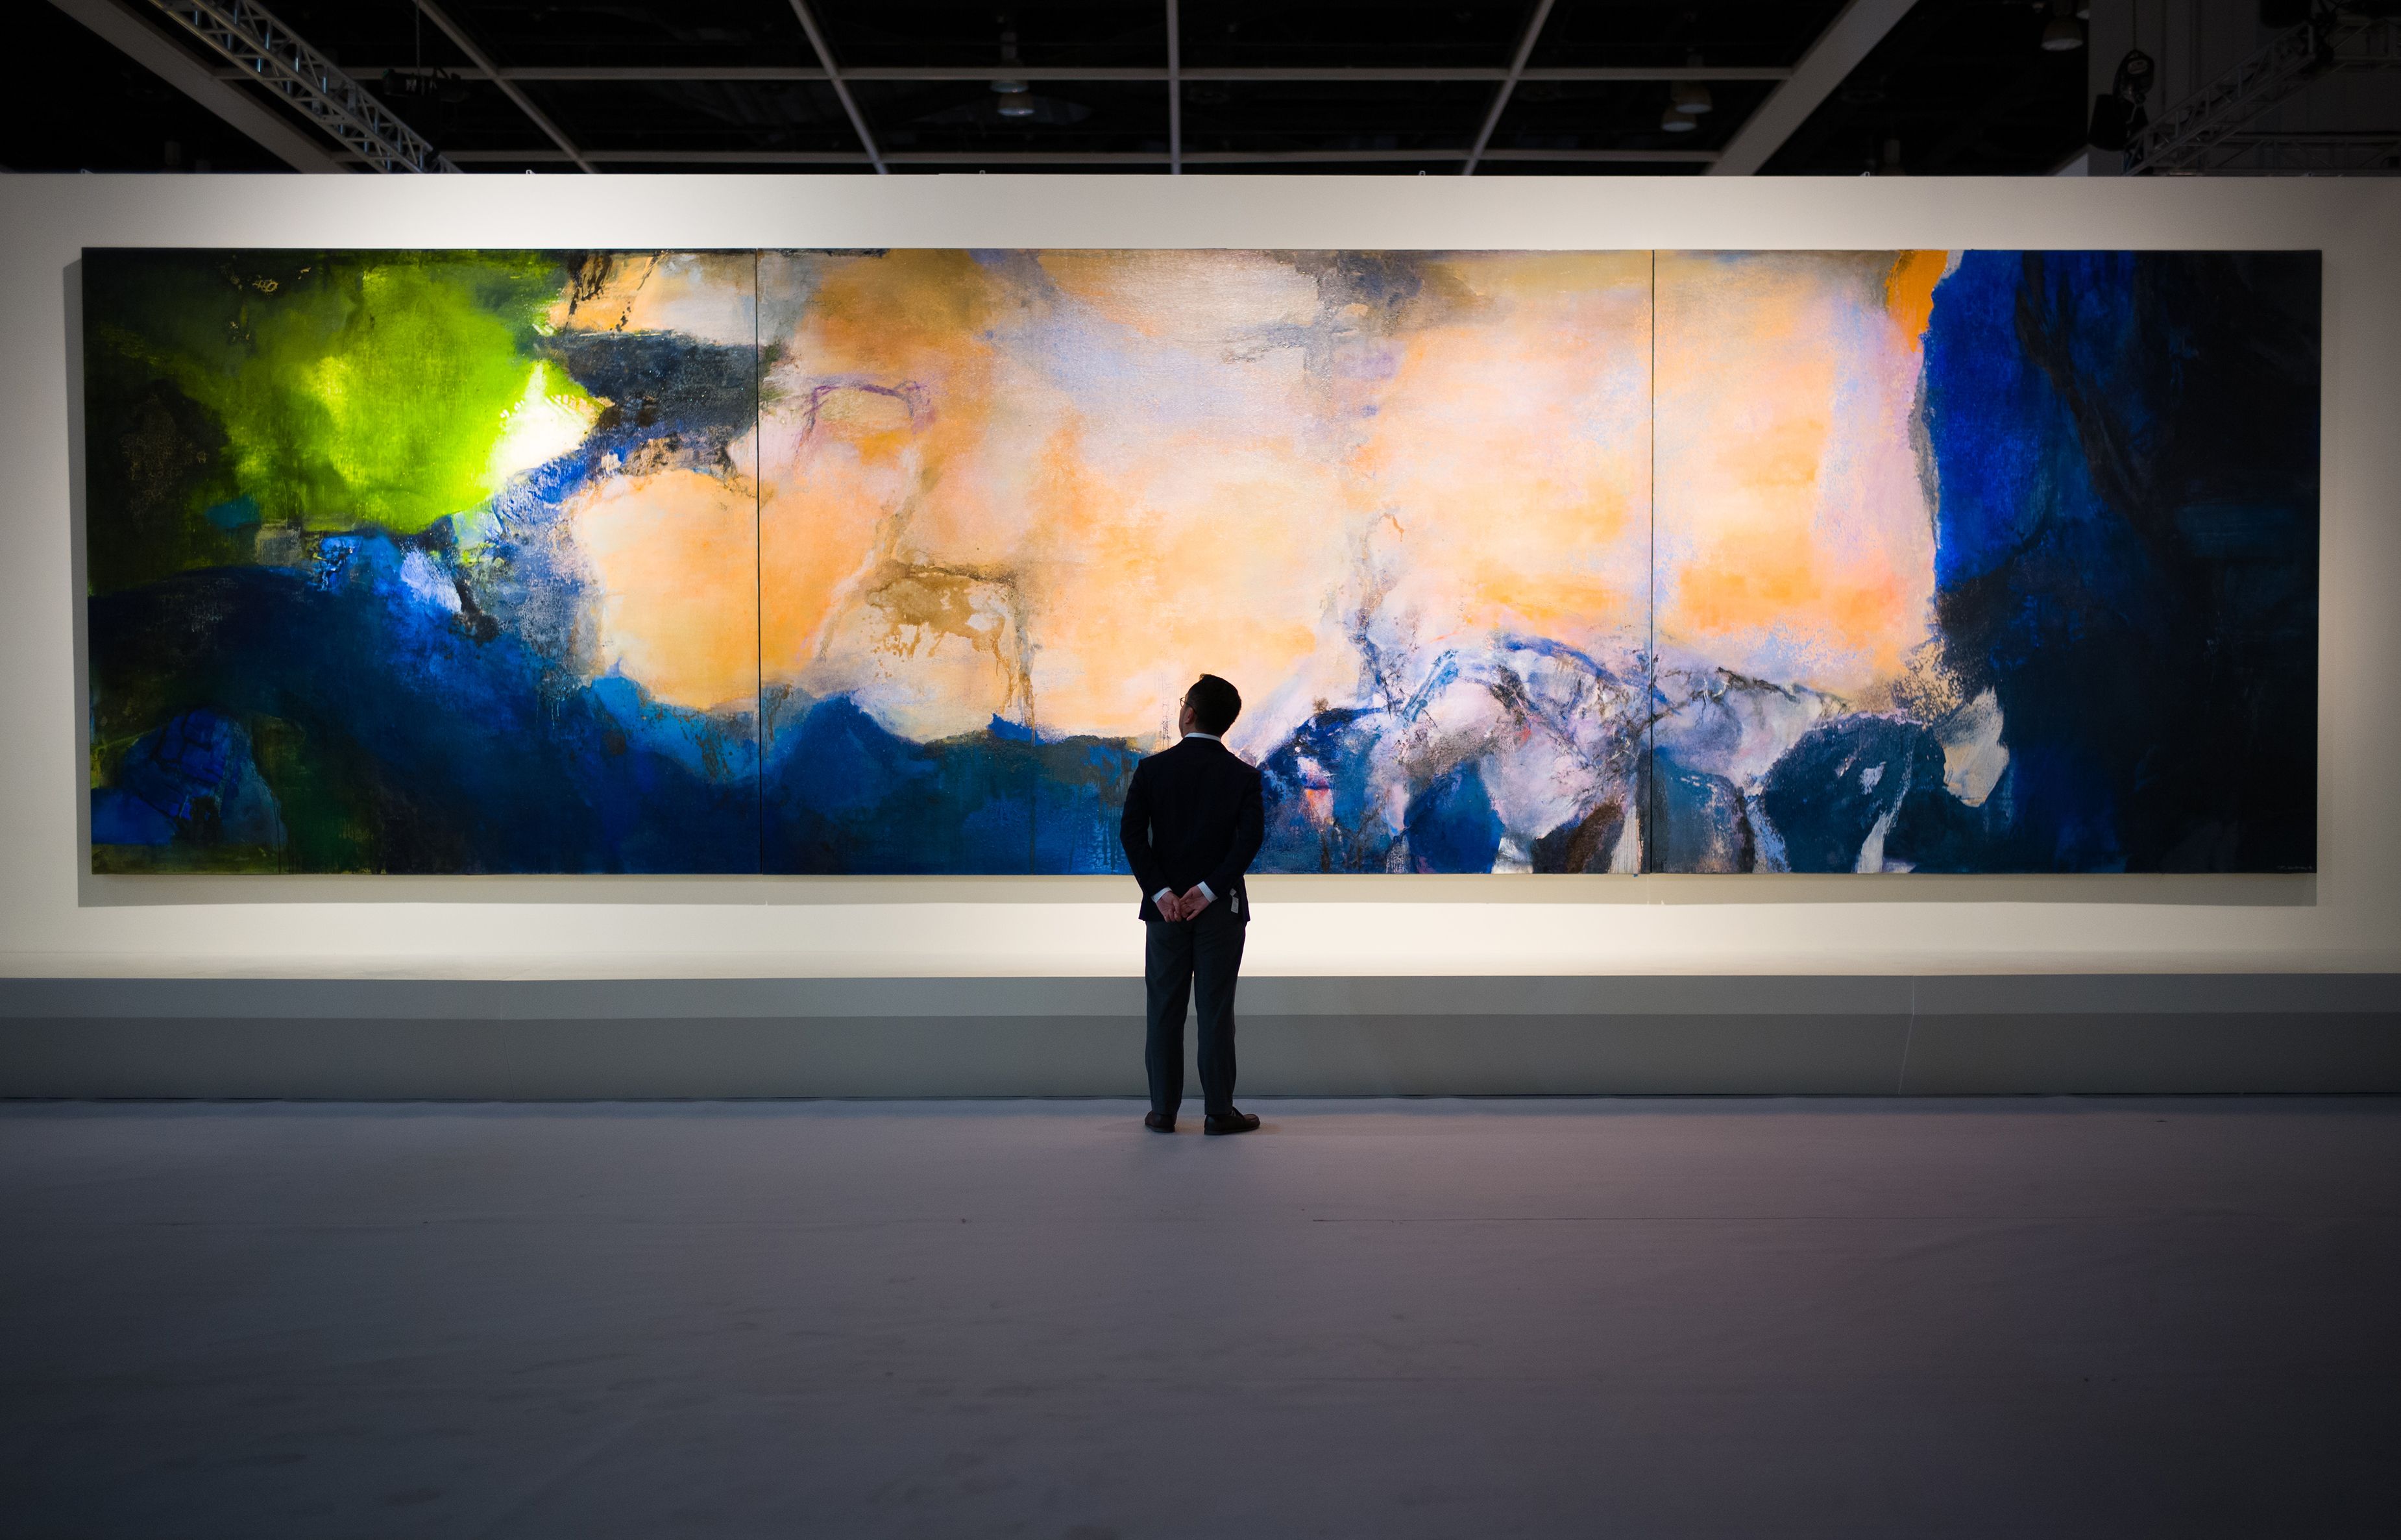 65 Million Chinese Oil Painting Leads One Of Asias Largest Ever